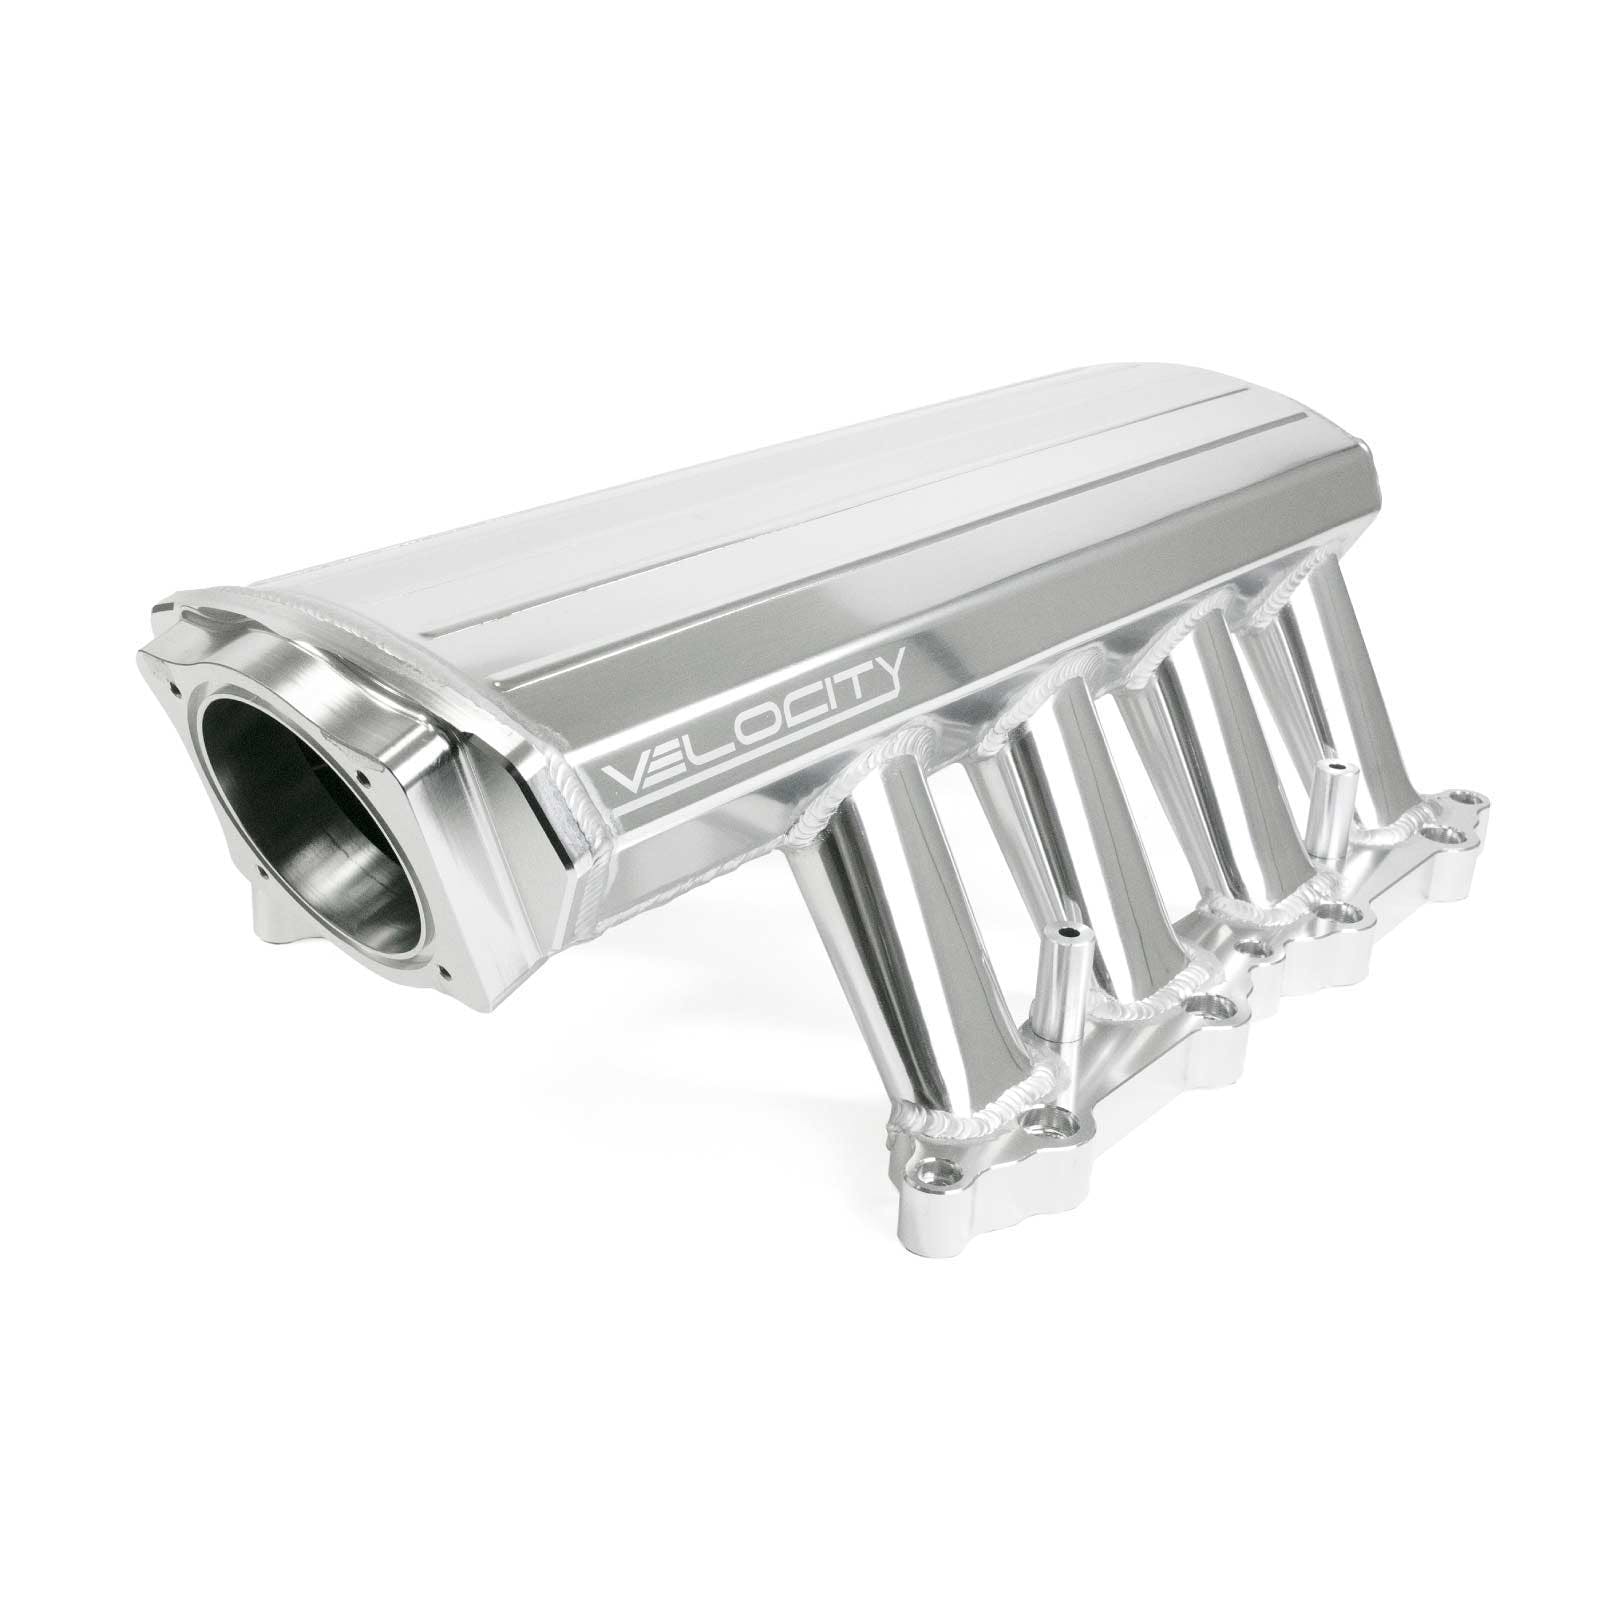 Top Street Performance 84050CA Aluminum Fabricated Intake Manifold, 102mm, Clear Anodized